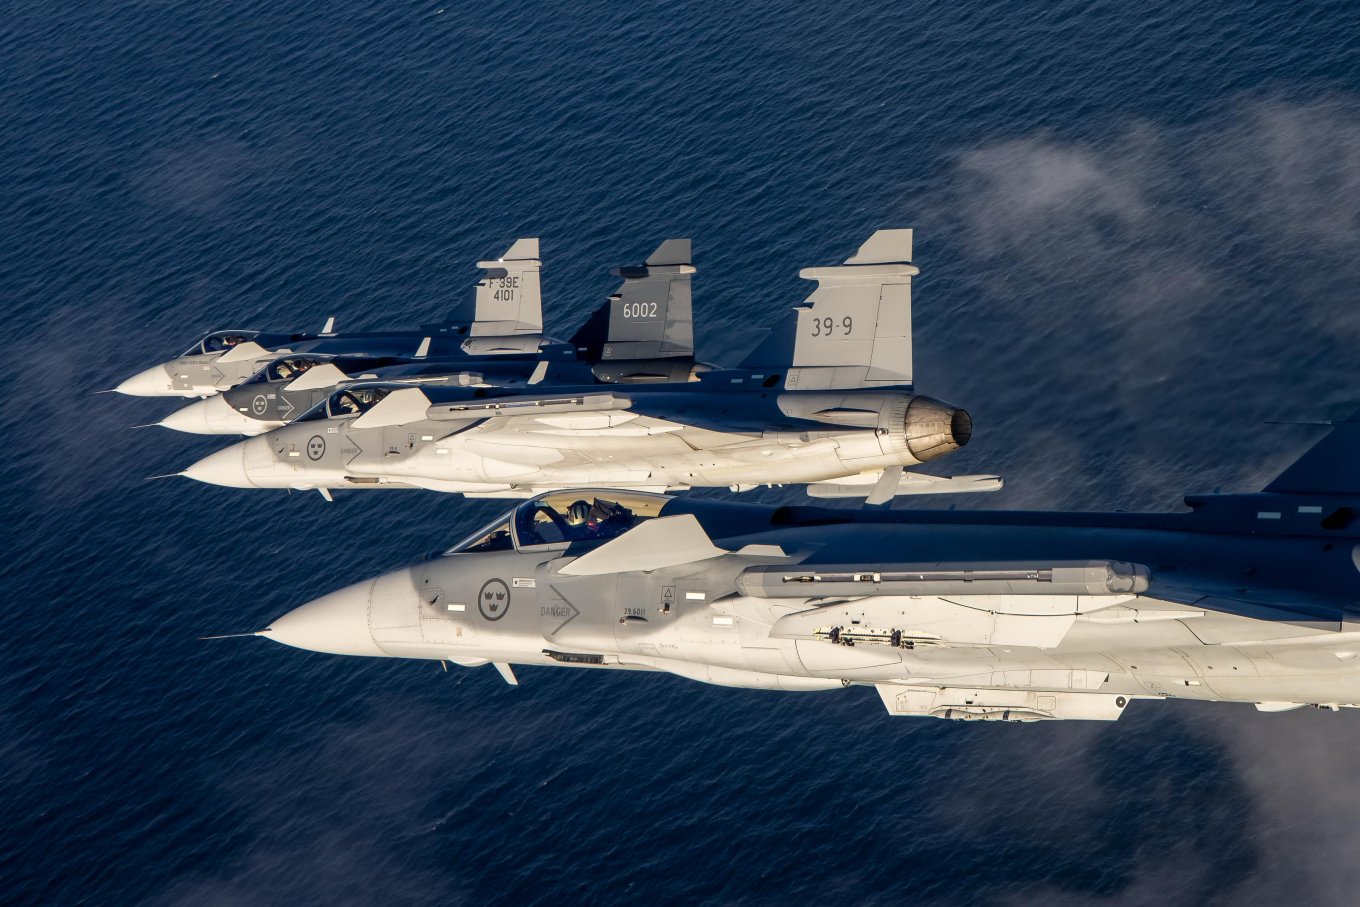 Tight four ship formation of Gripen E fighter jets Saab AB